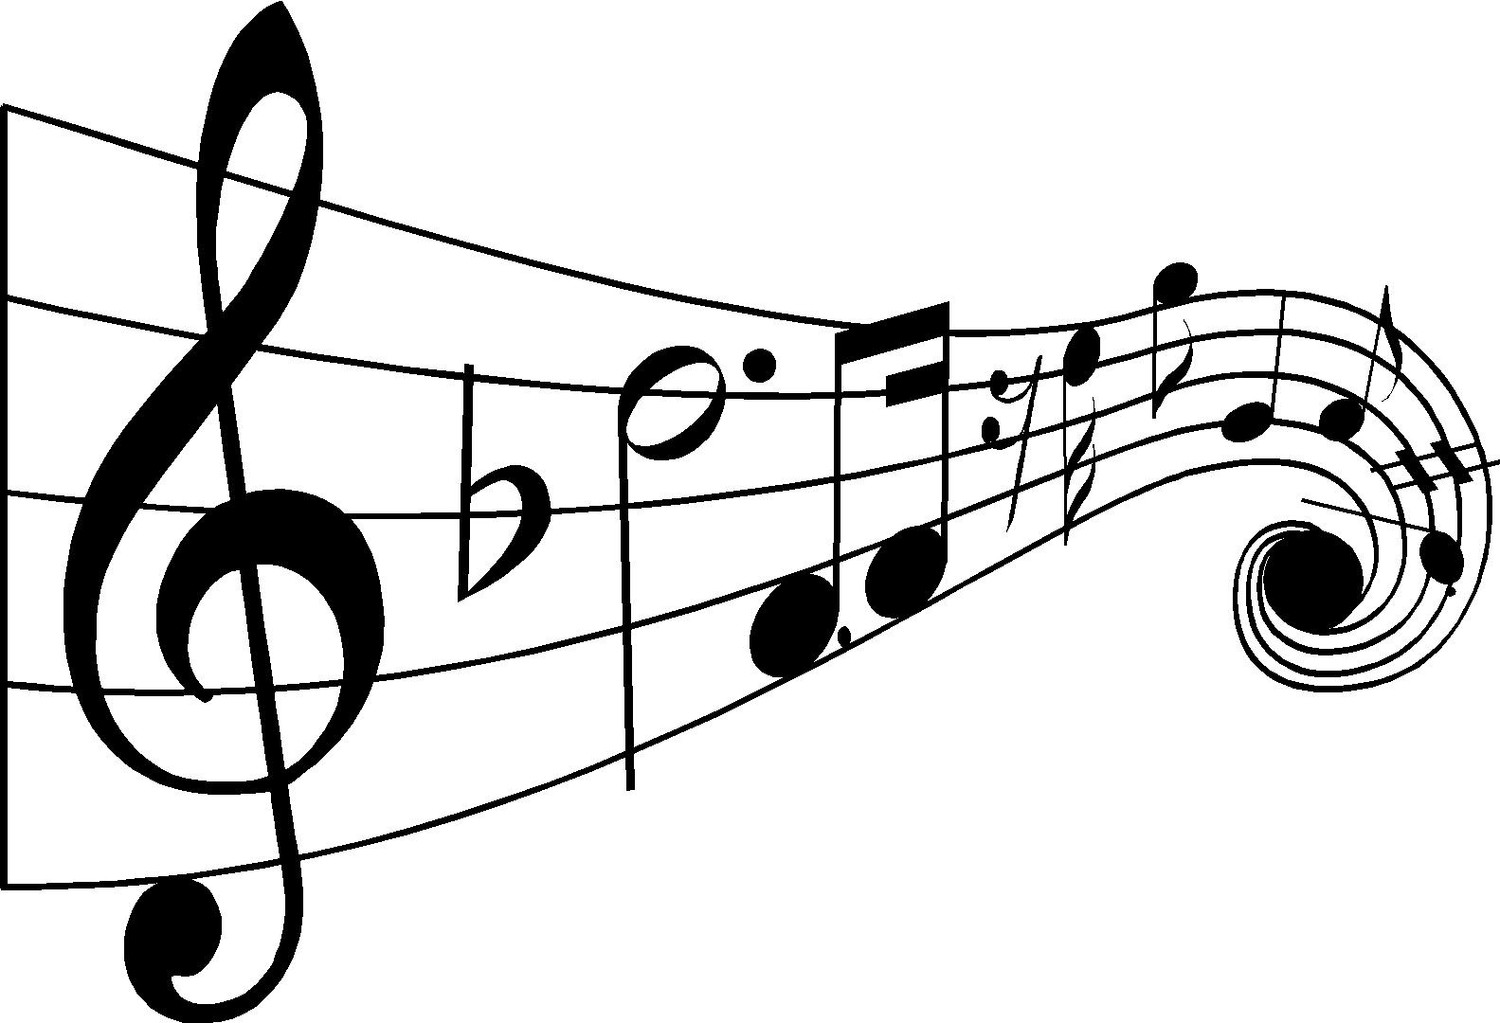 The Musical Notes Musical Note          Onpu